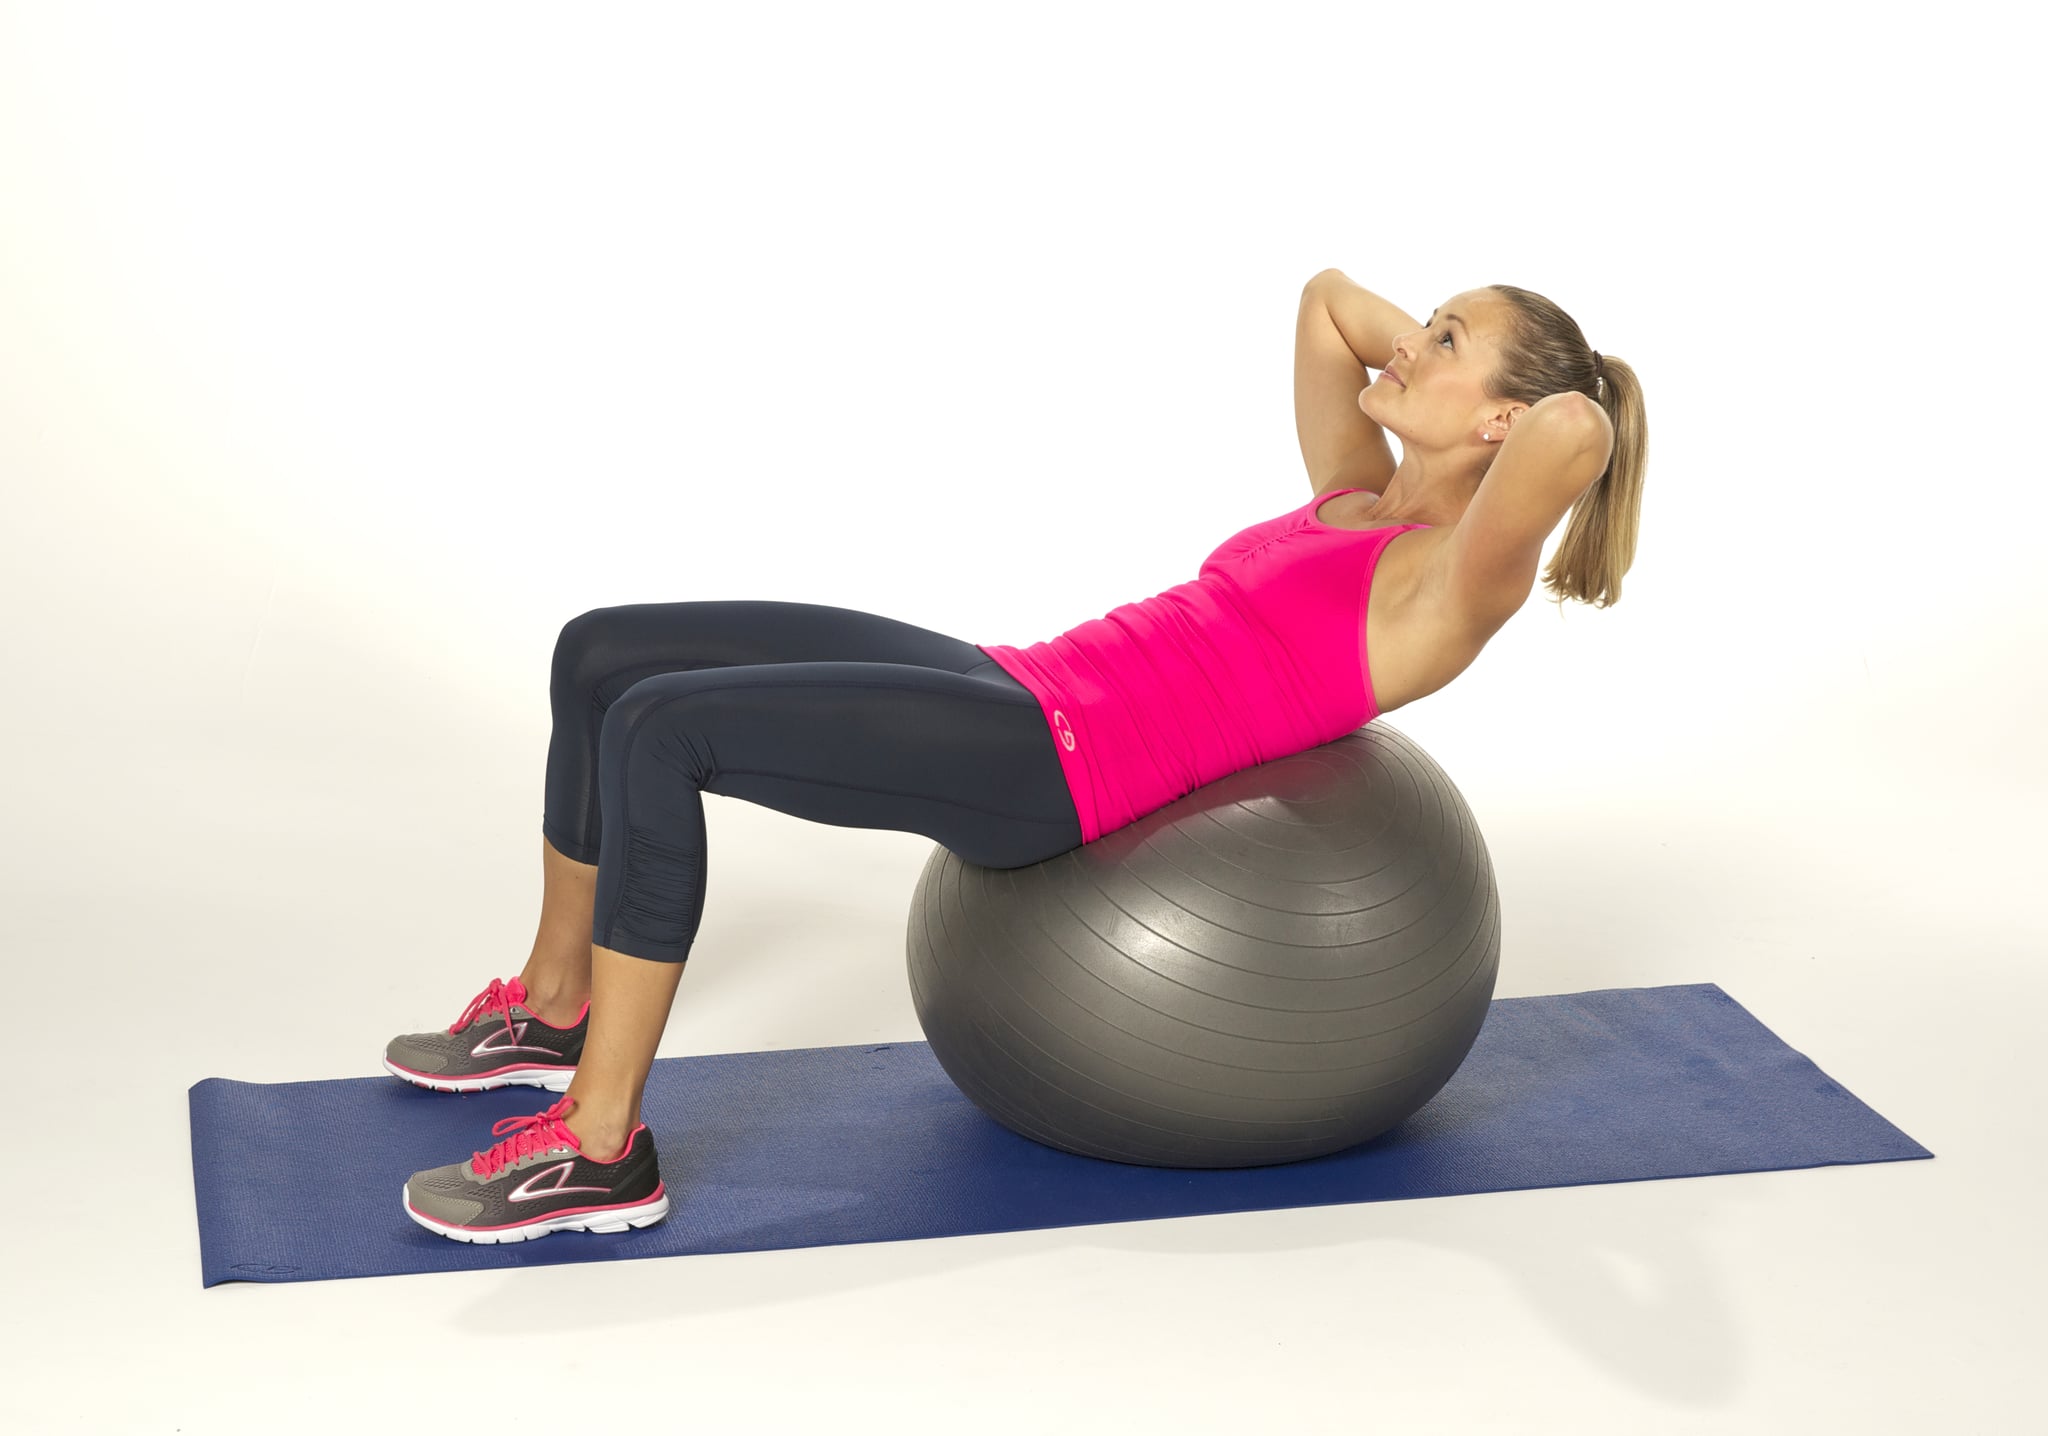 Crunches on Exercise Ball | Carve a Strong, Chiseled Core With ...